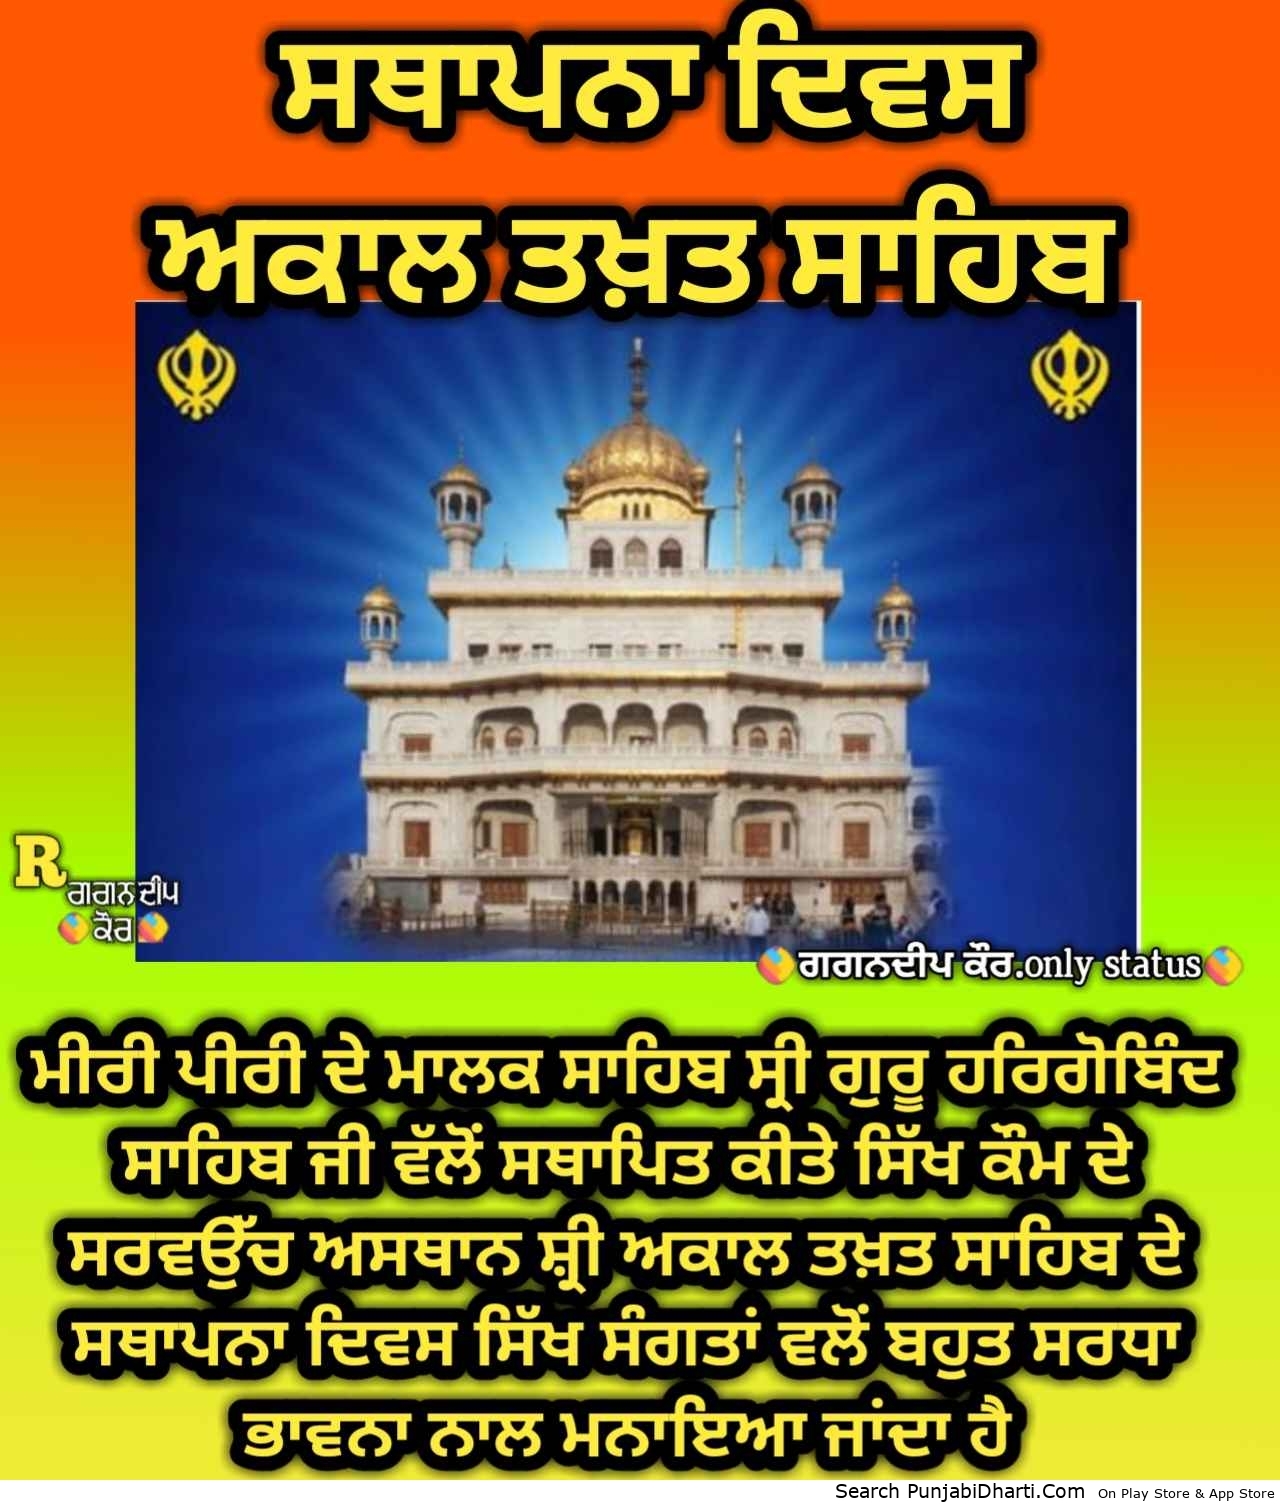 Punjabi Graphics, Images, Pictures For Facebook, Whatsapp